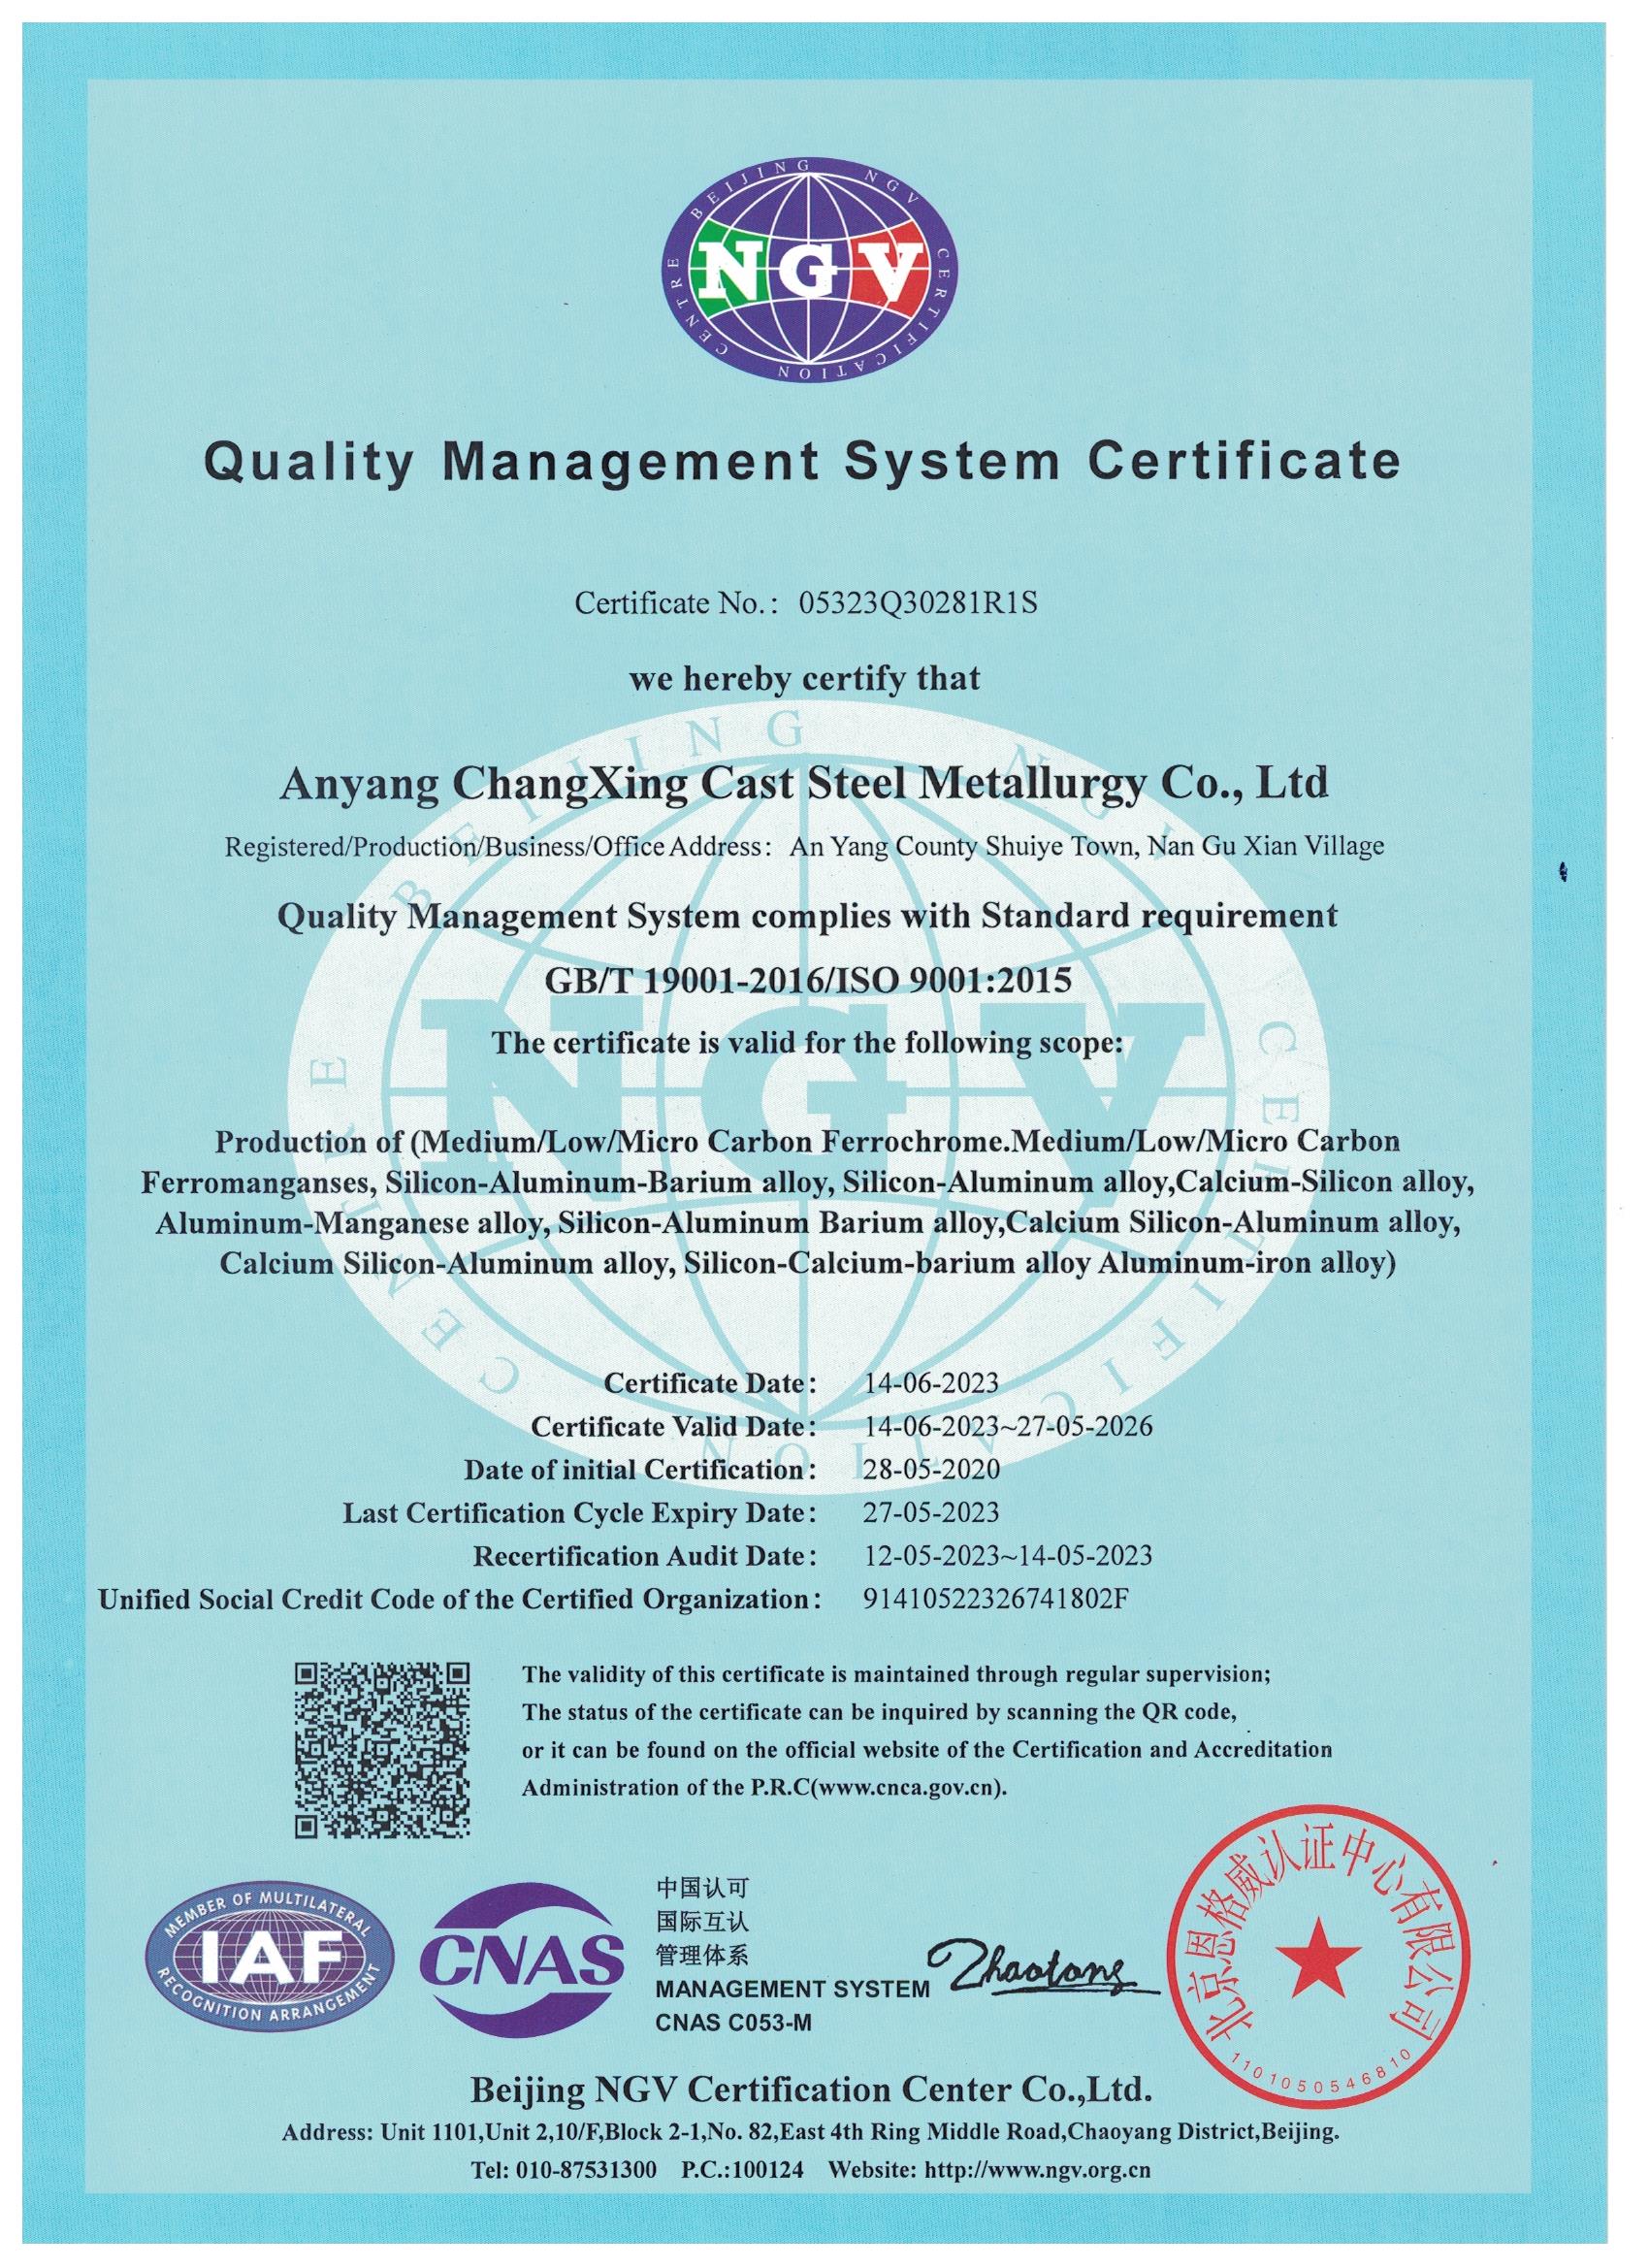 ISO 9001:2015 Quality Management System Certificate